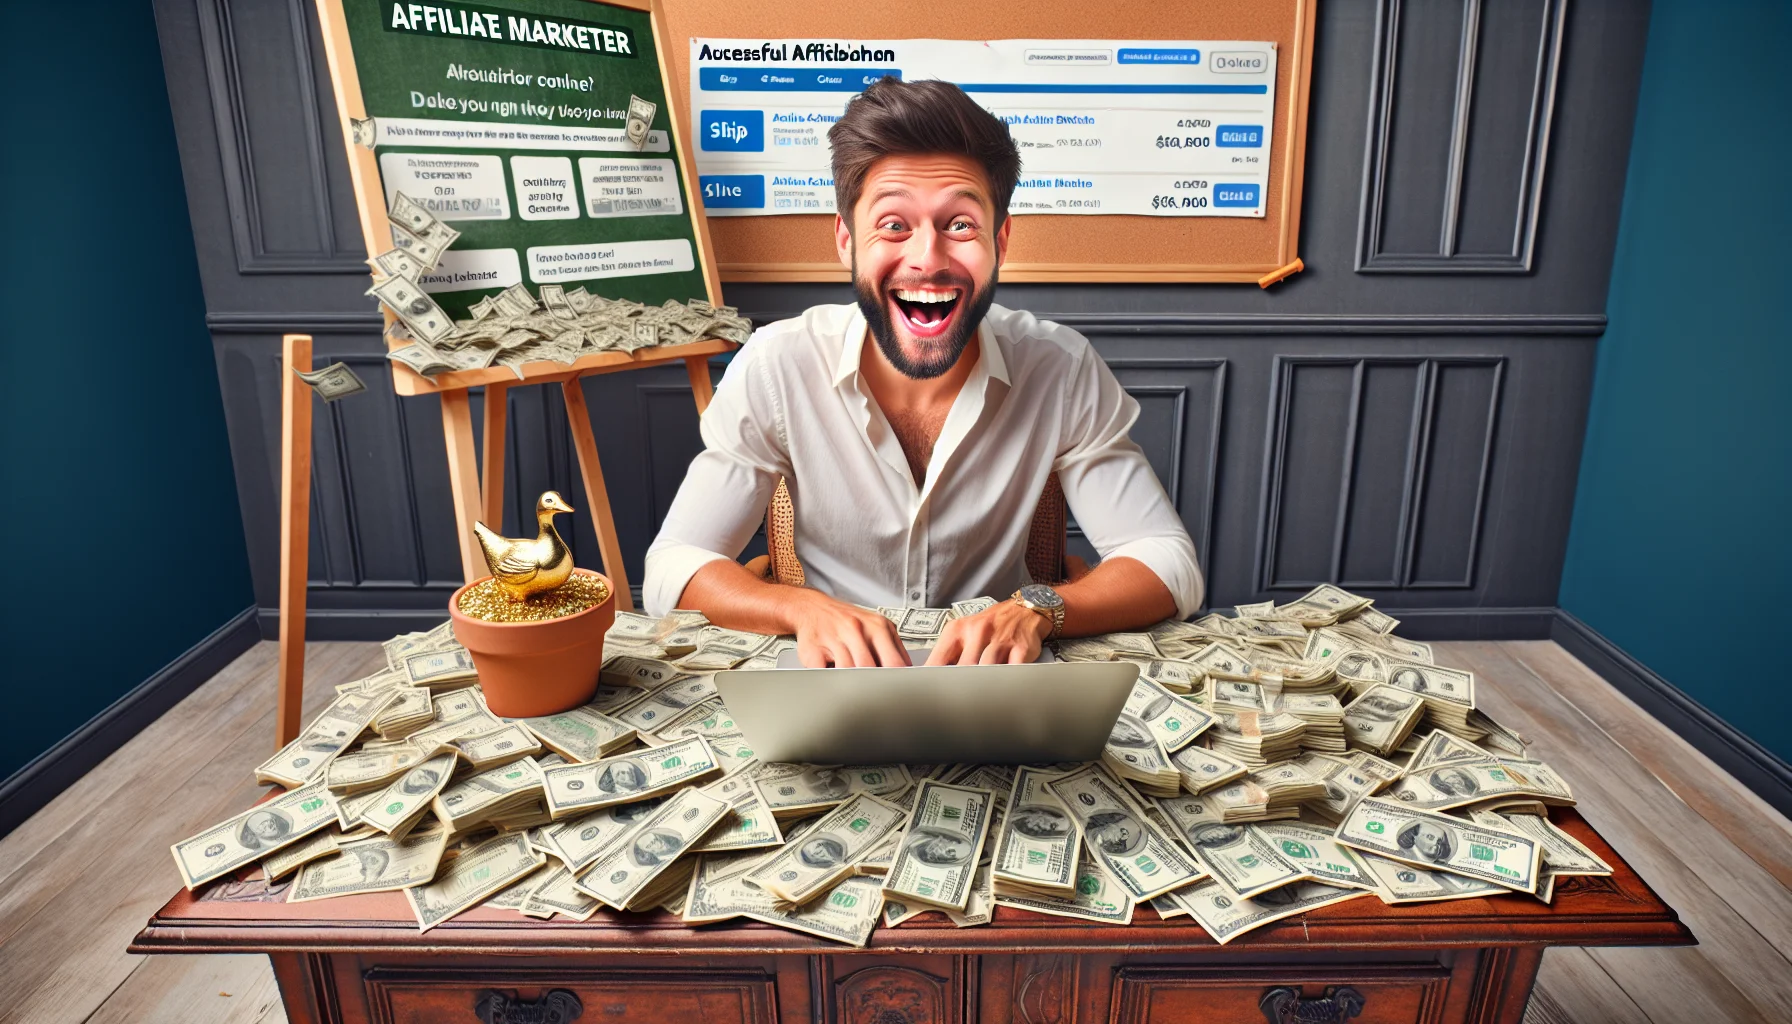 Create a humorous, realistic image depicting an affiliate marketer, a Caucasian male in his late twenties with a beard, sitting at a vintage wooden desk. He's in a room filled with piles of dollar bills, symbolizing the money he's made online. He's overjoyed with a wide grin on his face, typing on a laptop that displays a successful affiliate dashboard. Behind him is a corkboard displaying various advertisements. Throw in some elements of surprise such as a money tree growing from a pot next to his desk and a golden goose on top of the downpour of cash.